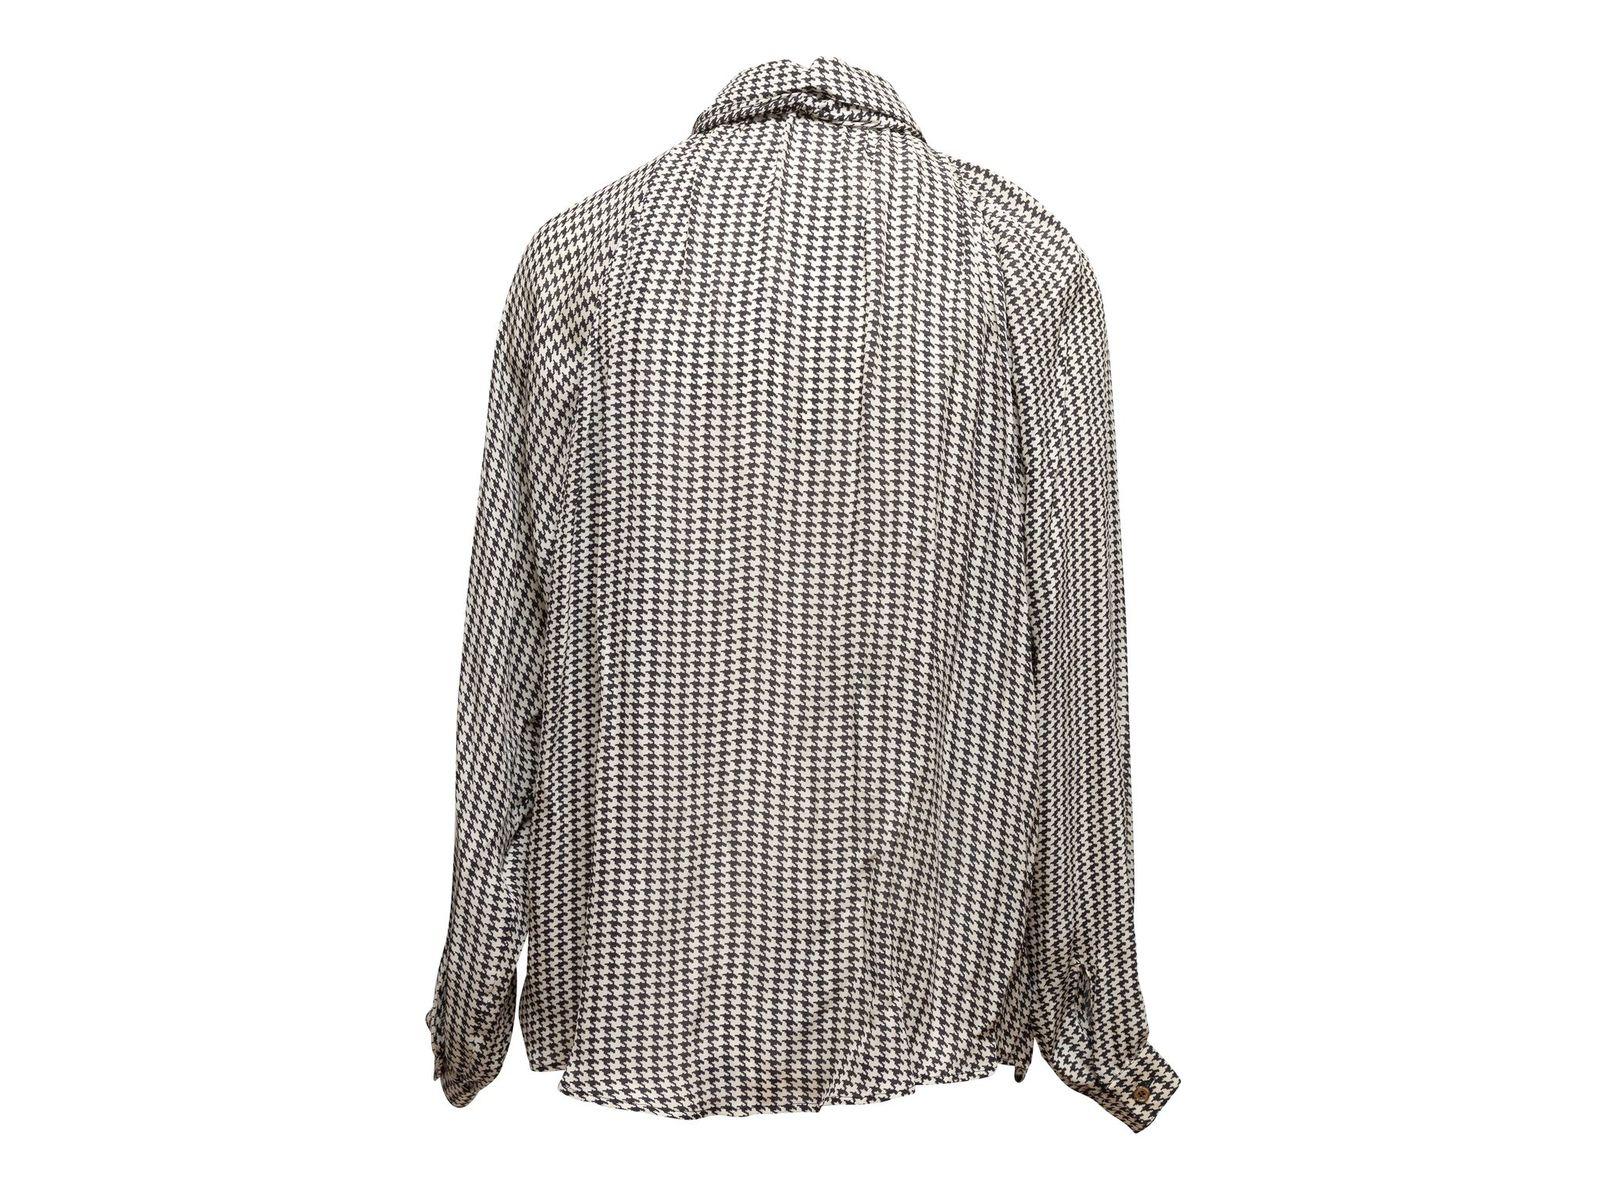 Gucci Black & White Houndstooth Print Silk Blouse 2